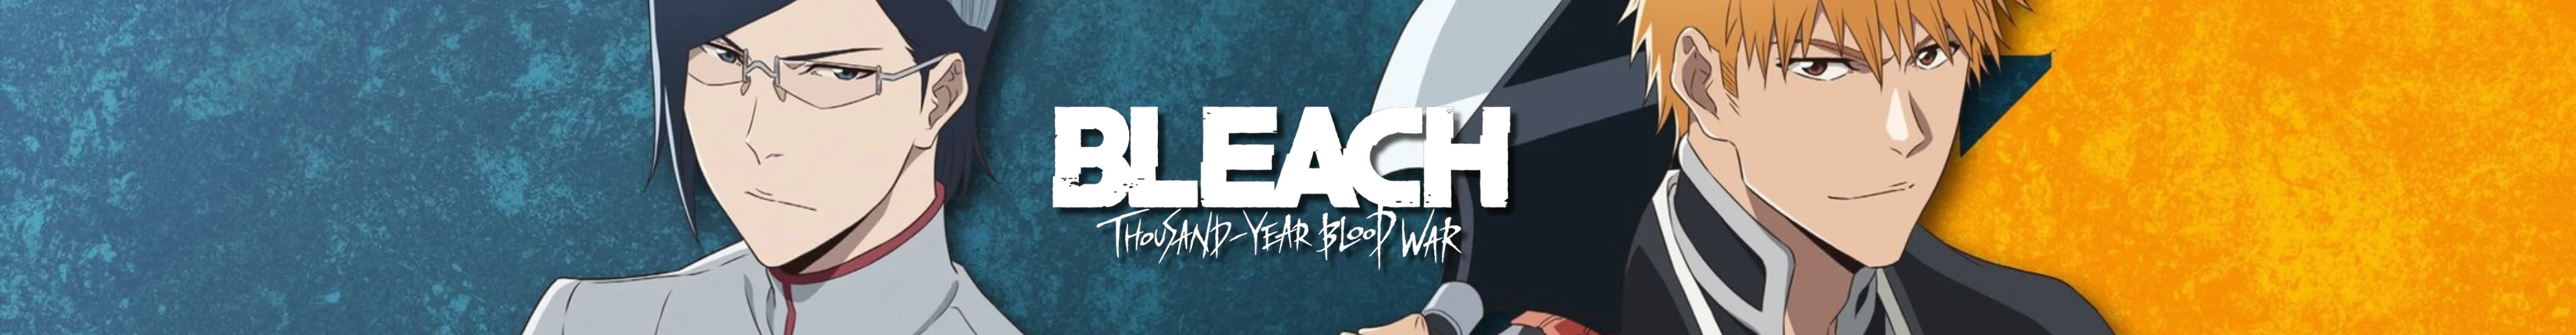 Bleach products banner